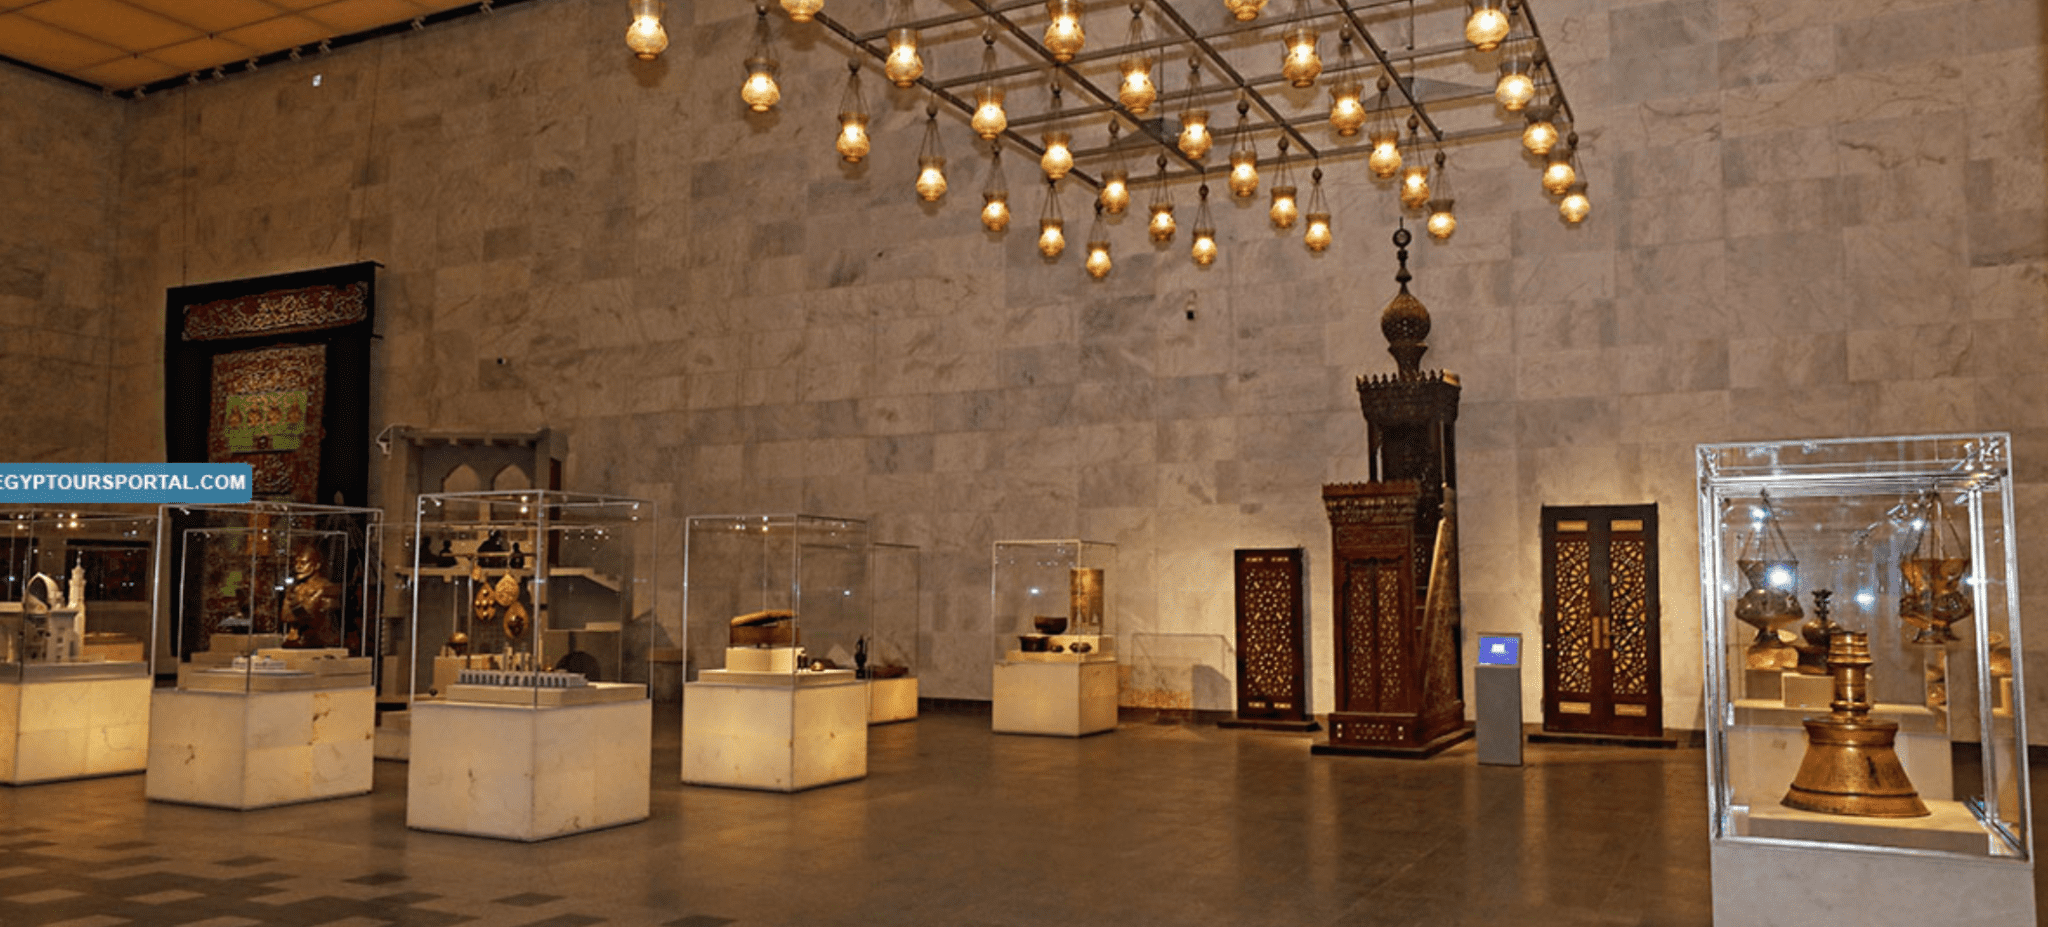 Internal image of the National Museum of Egyptian Civilization who hosts the Golden Royal Mummy Parade